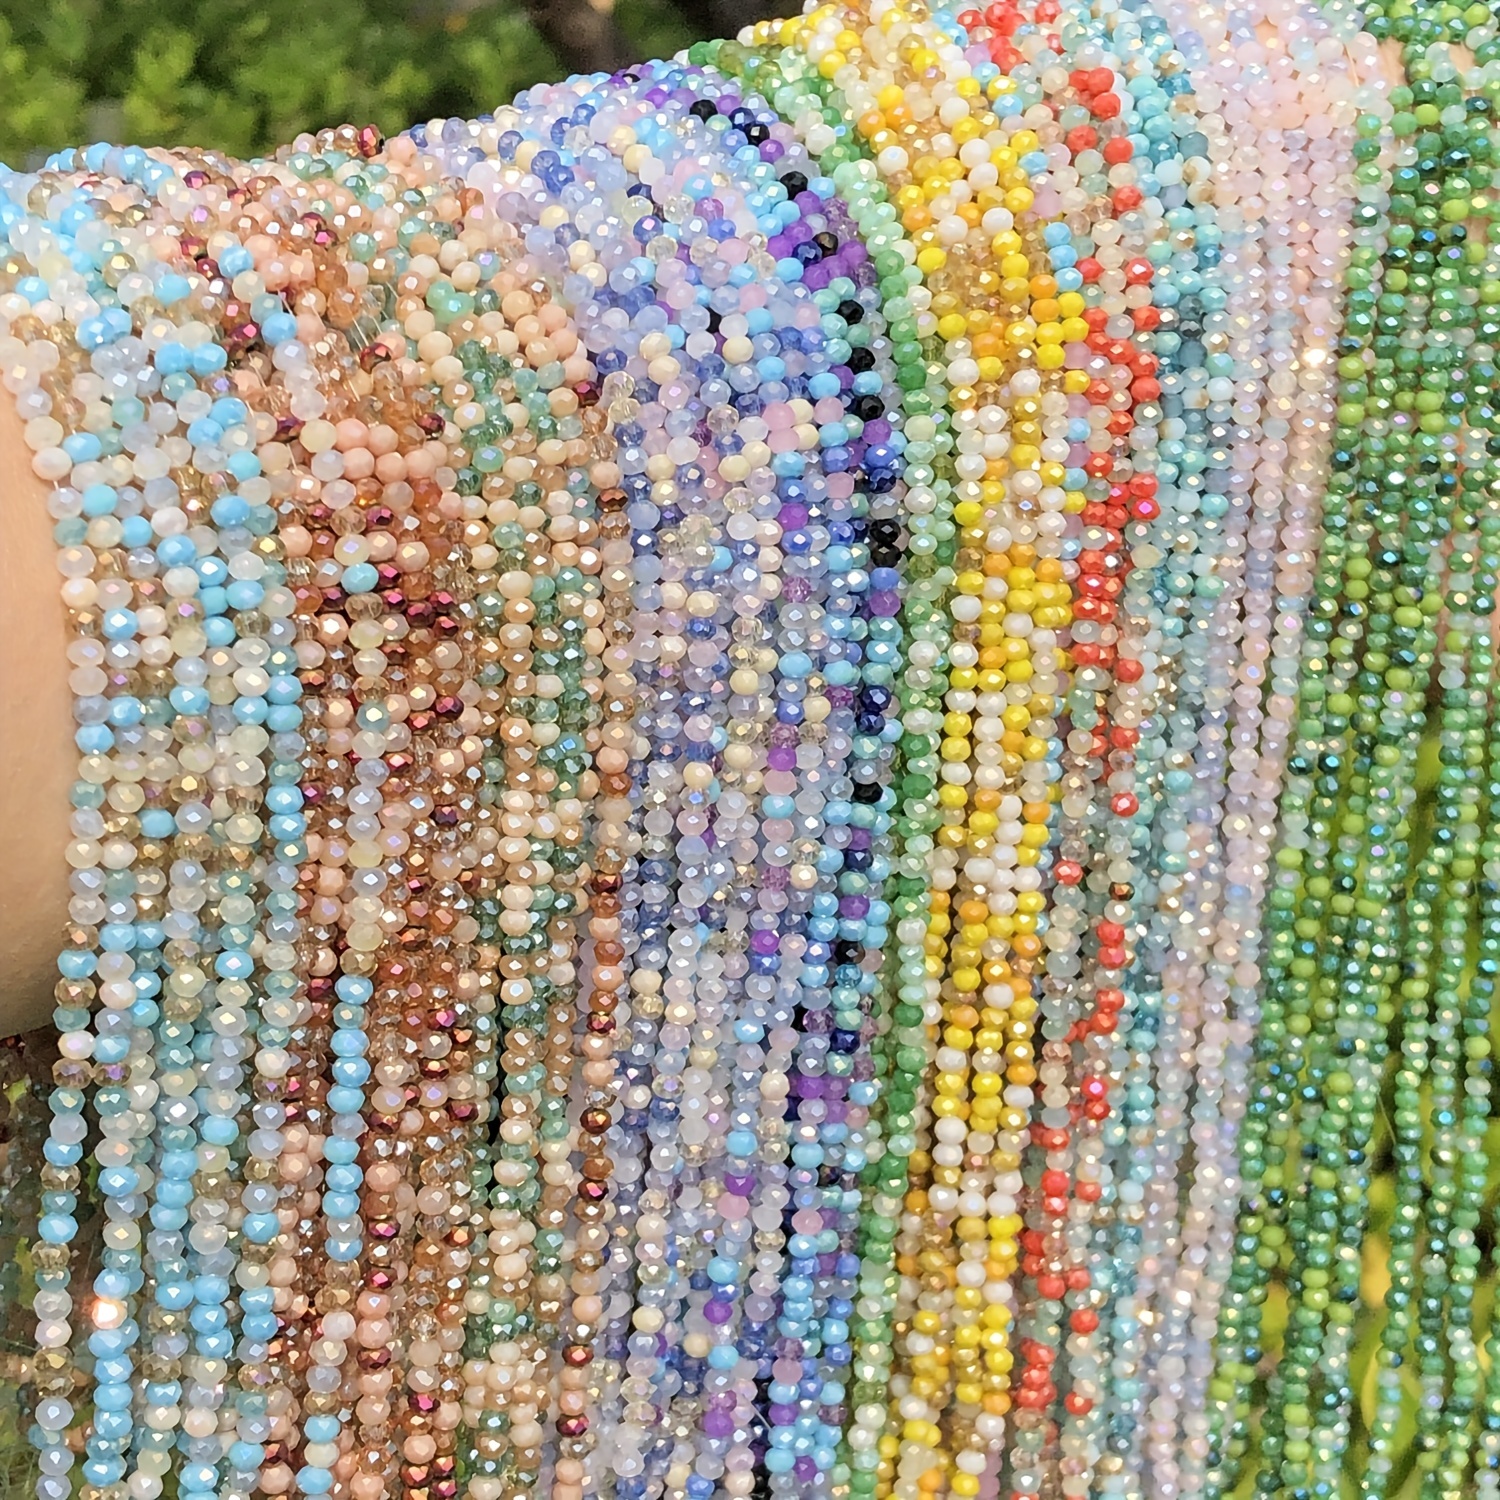  Mini Faceted Beads